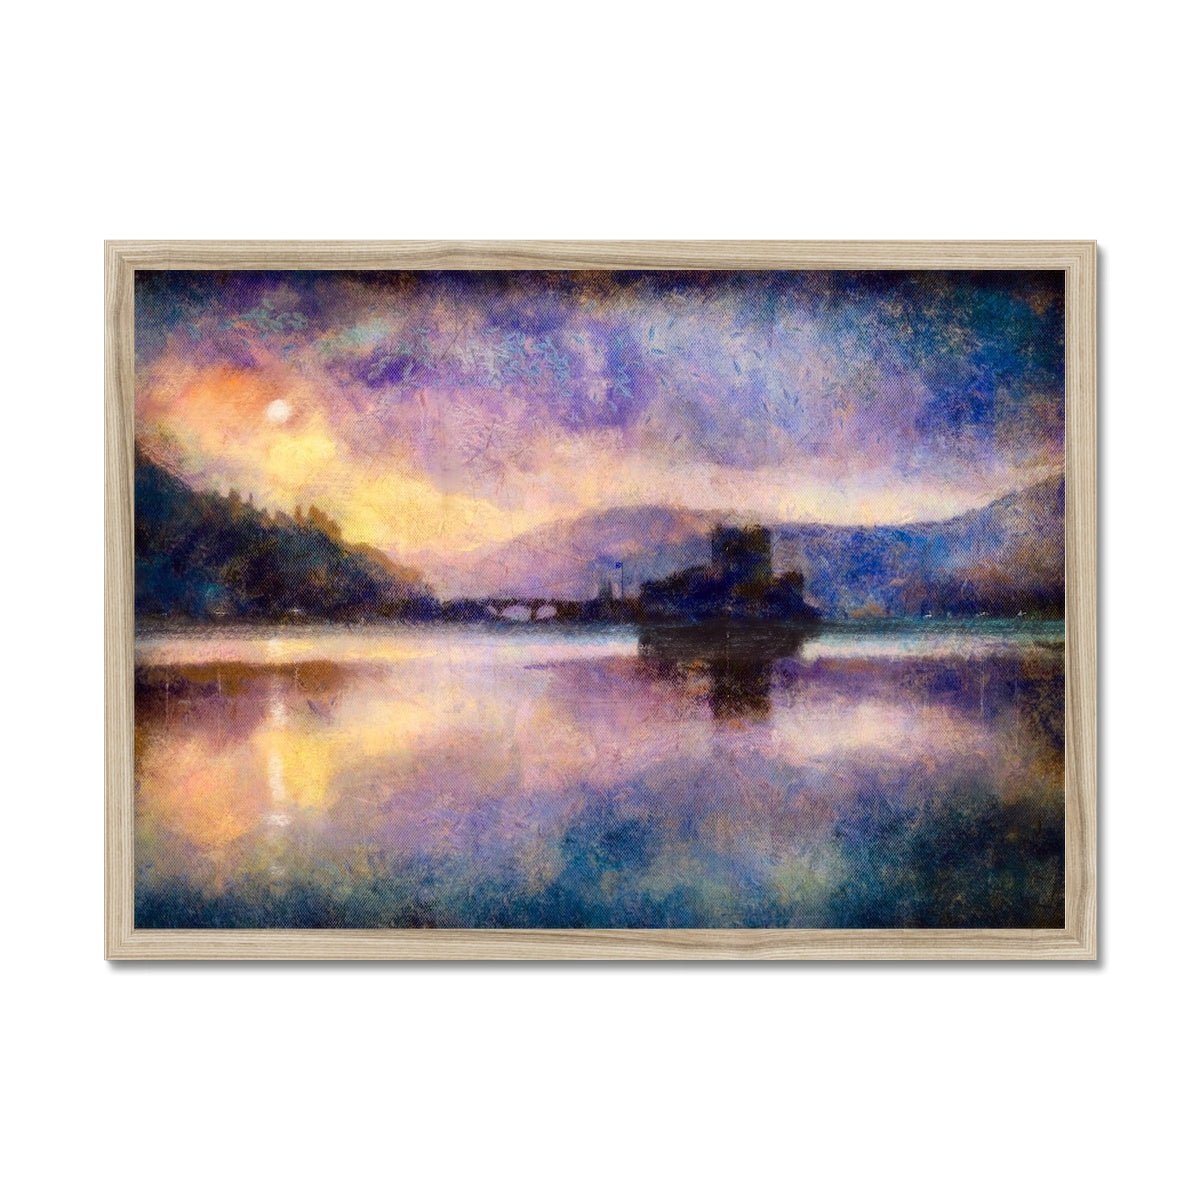 Eilean Donan Castle Moonlight Painting | Framed Prints From Scotland-Framed Prints-Historic & Iconic Scotland Art Gallery-A2 Landscape-Natural Frame-Paintings, Prints, Homeware, Art Gifts From Scotland By Scottish Artist Kevin Hunter